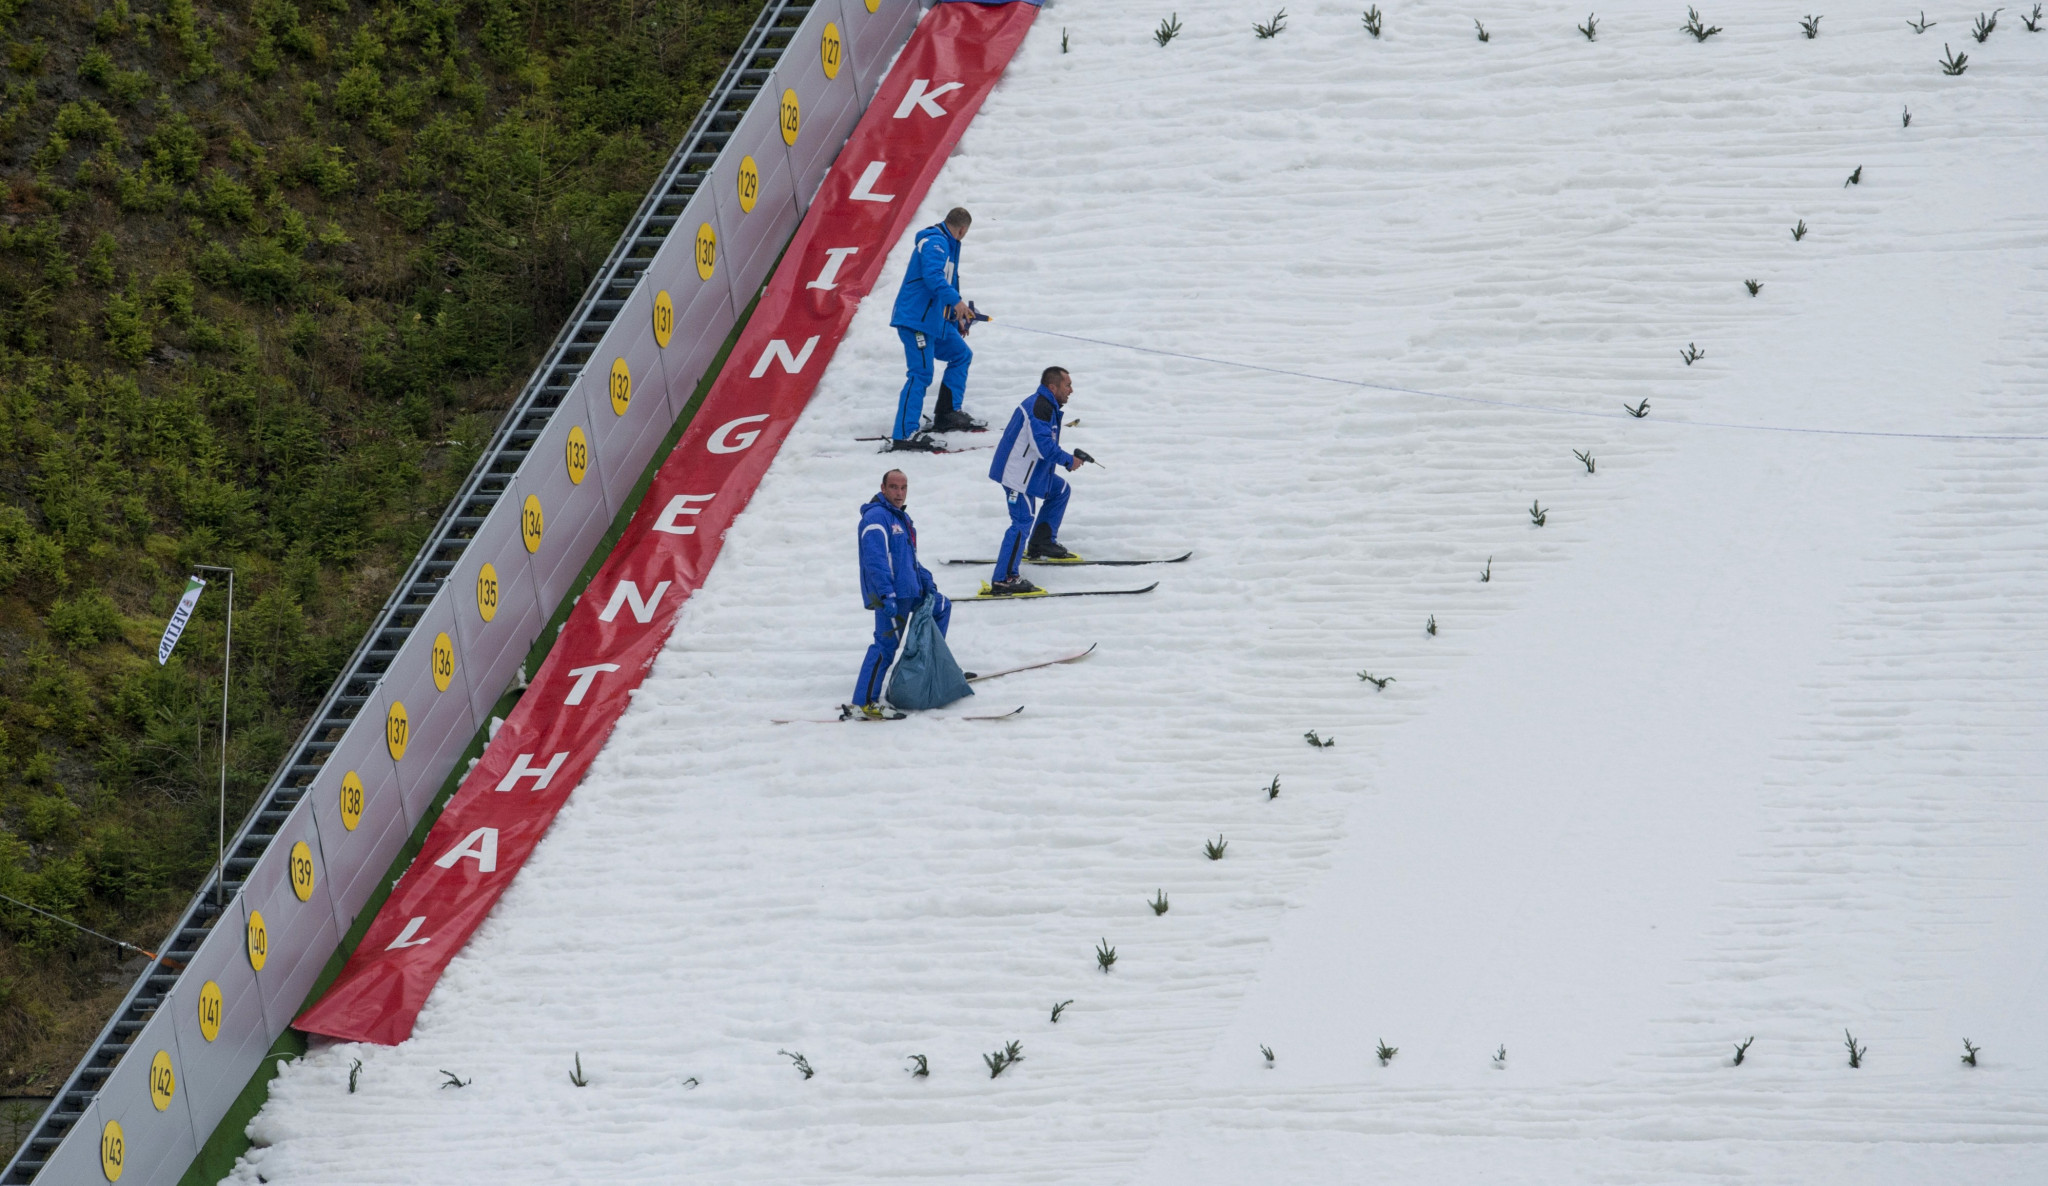 Provisional competition round at Nordic Combined World Cup cancelled